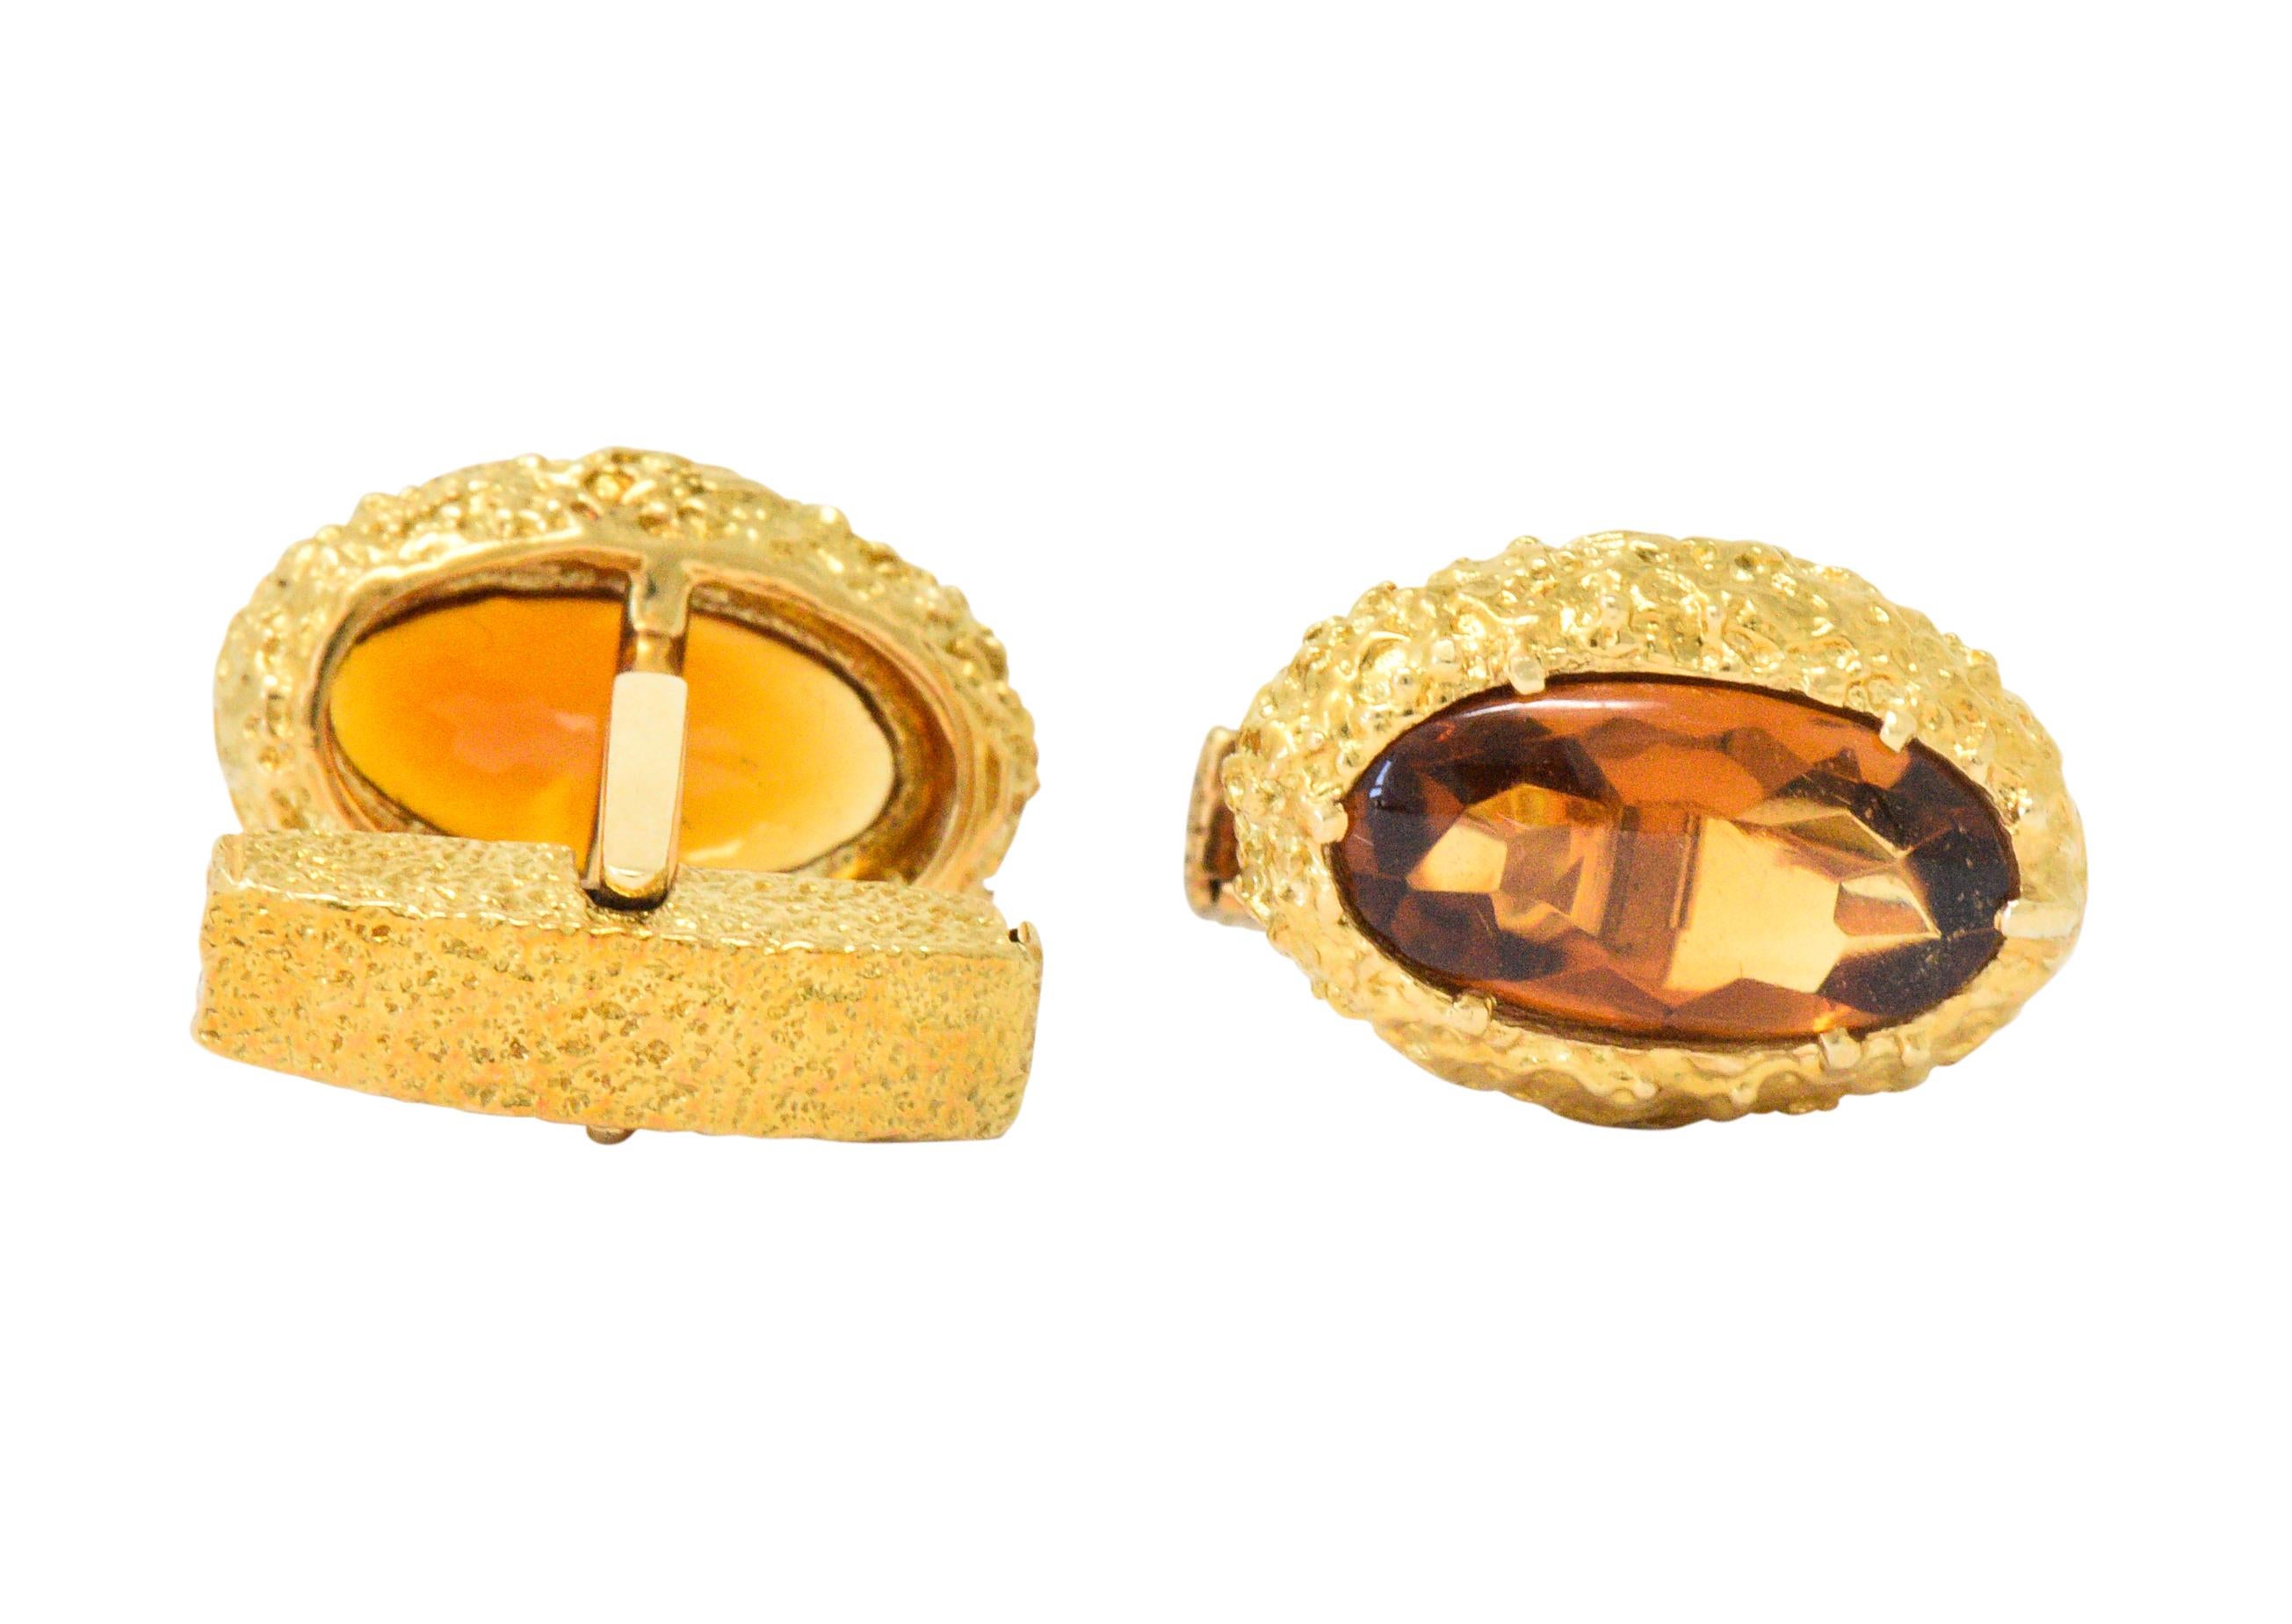 Lever back style cufflinks featuring buff top citrine, measuring approximately 16.0 mm x 8.0 mm

Transparent with a faceted base and a well-matched deep cognac color

Bezel set in a highly textured surround

With maker's mark

Tested as 18 karat